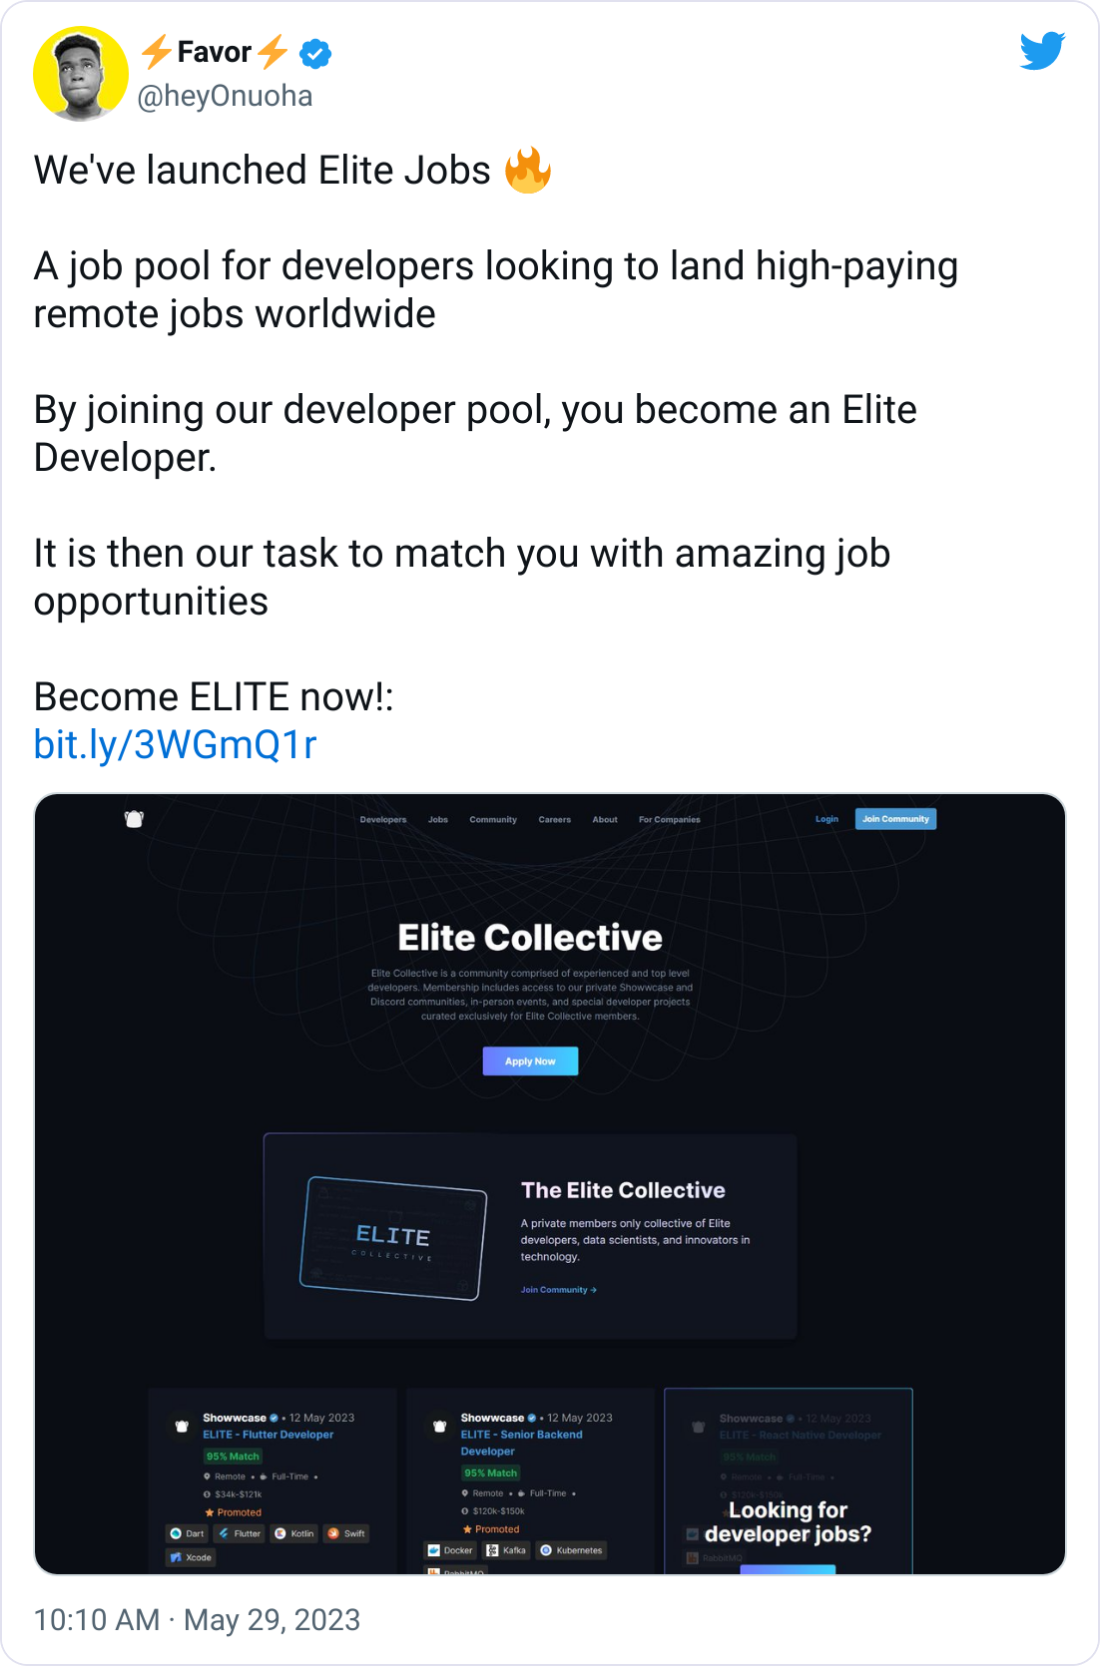 ⚡Favor⚡ @heyOnuoha We've launched Elite Jobs 🔥  A job pool for developers looking to land high-paying remote jobs worldwide  By joining our developer pool, you become an Elite Developer.  It is then our task to match you with amazing job opportunities  Become ELITE now!: https://bit.ly/3WGmQ1r